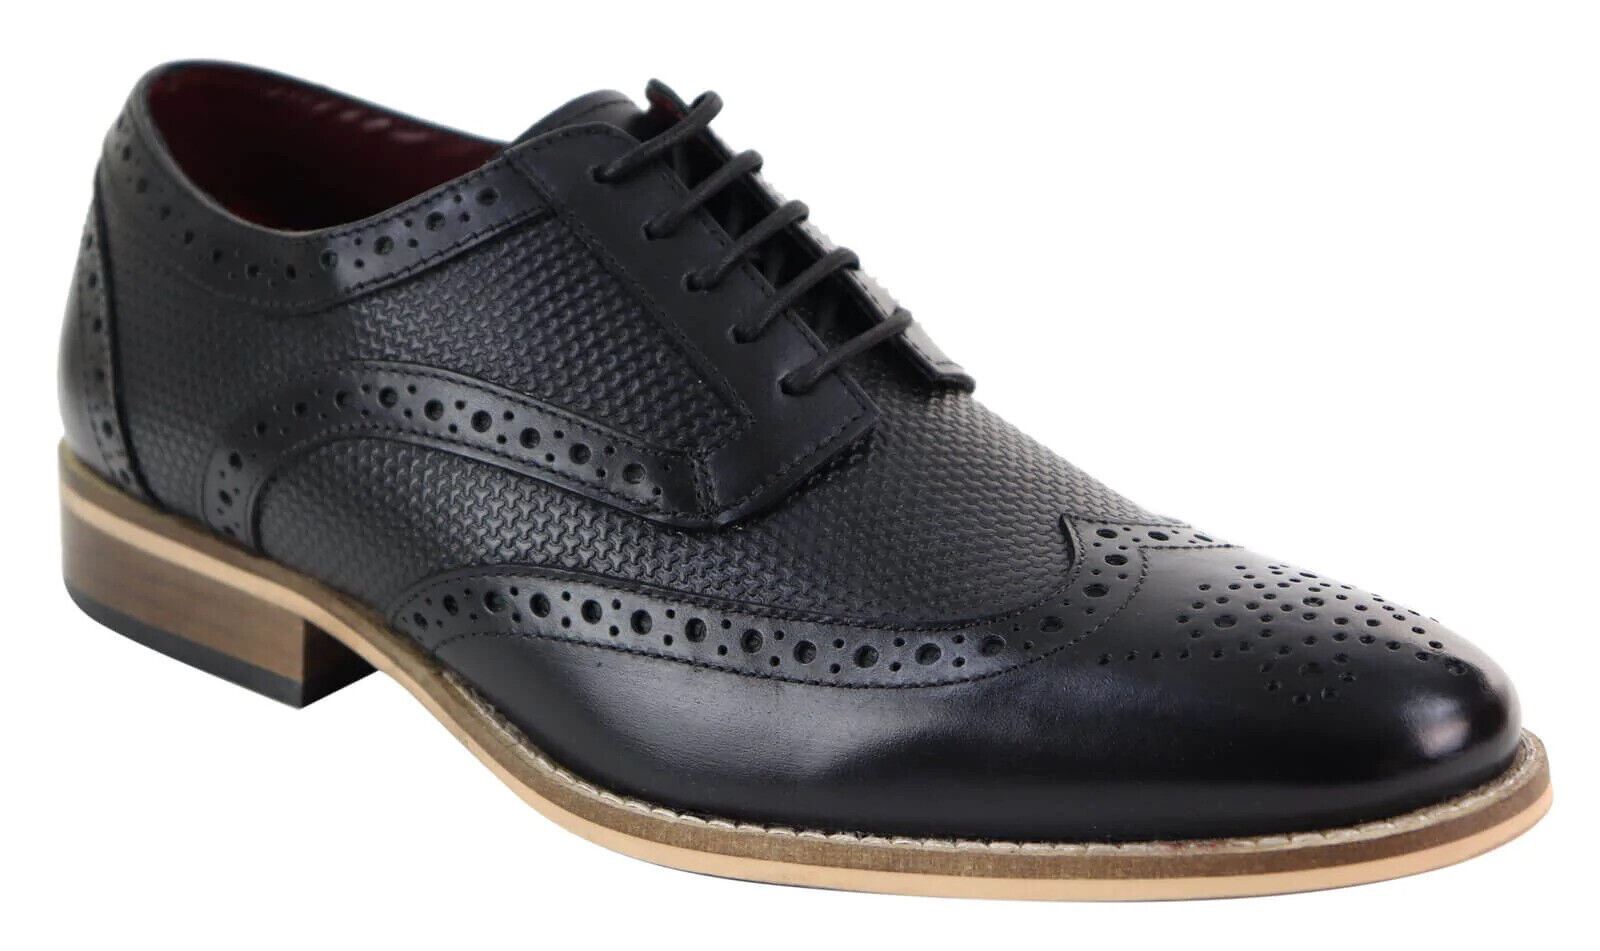 Mens Classic Oxford Brogue Shoes in Patterned Black Leather - Upperclass Fashions 